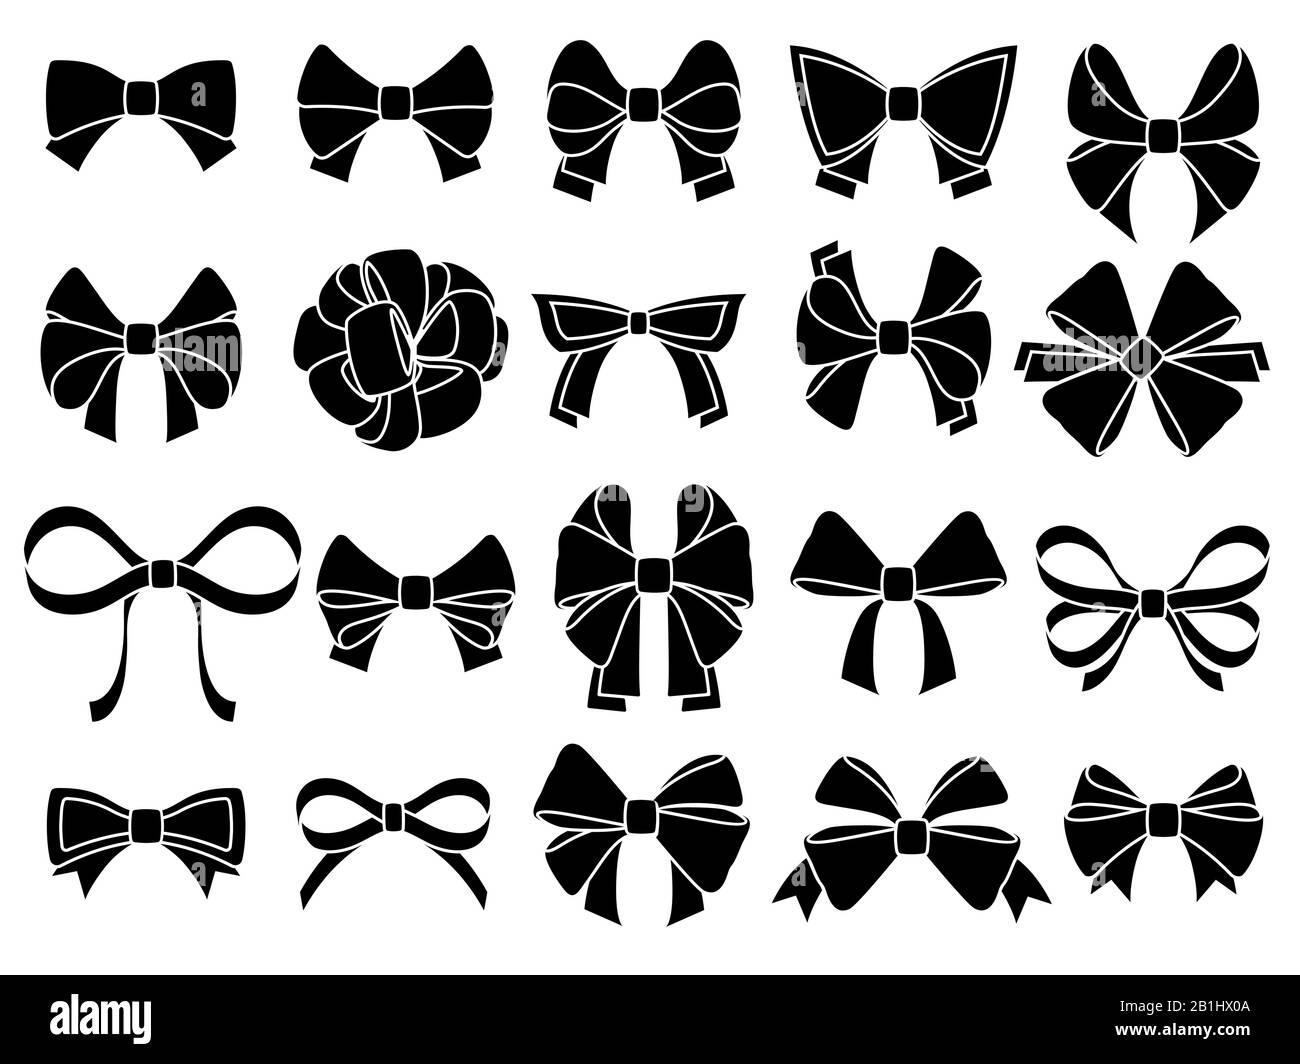 Decorative bow silhouette. Gift wrapping favor ribbon, black jubilee bows stencil vector icons set Stock Vector